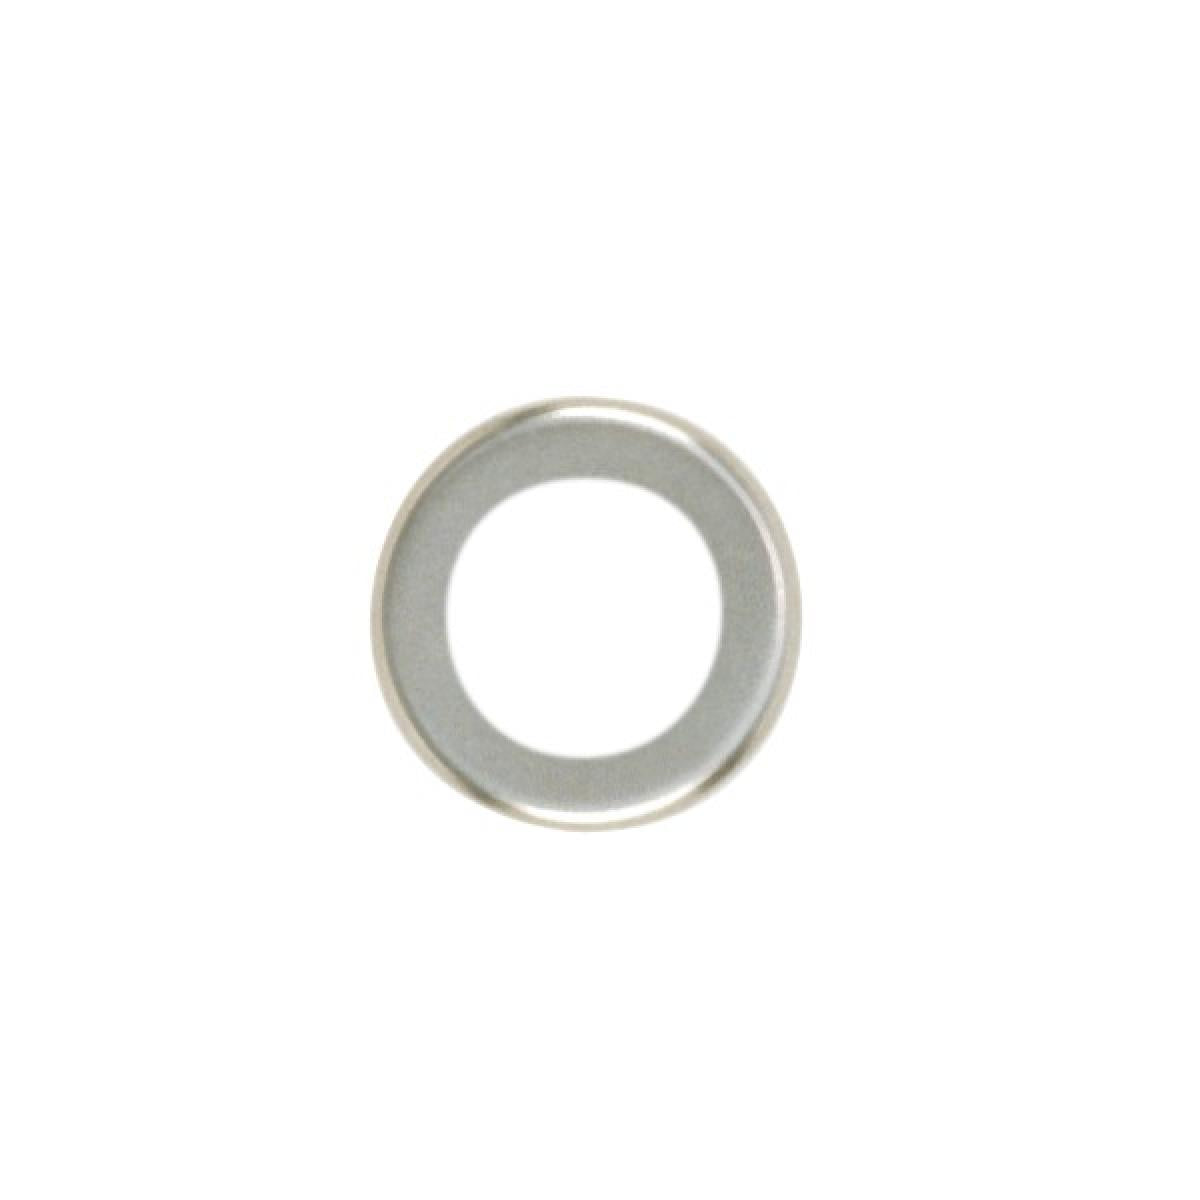 Satco 90-1833 Steel Check Ring Curled Edge 1/4 IP Slip Unfinished 1-1/4" Diameter